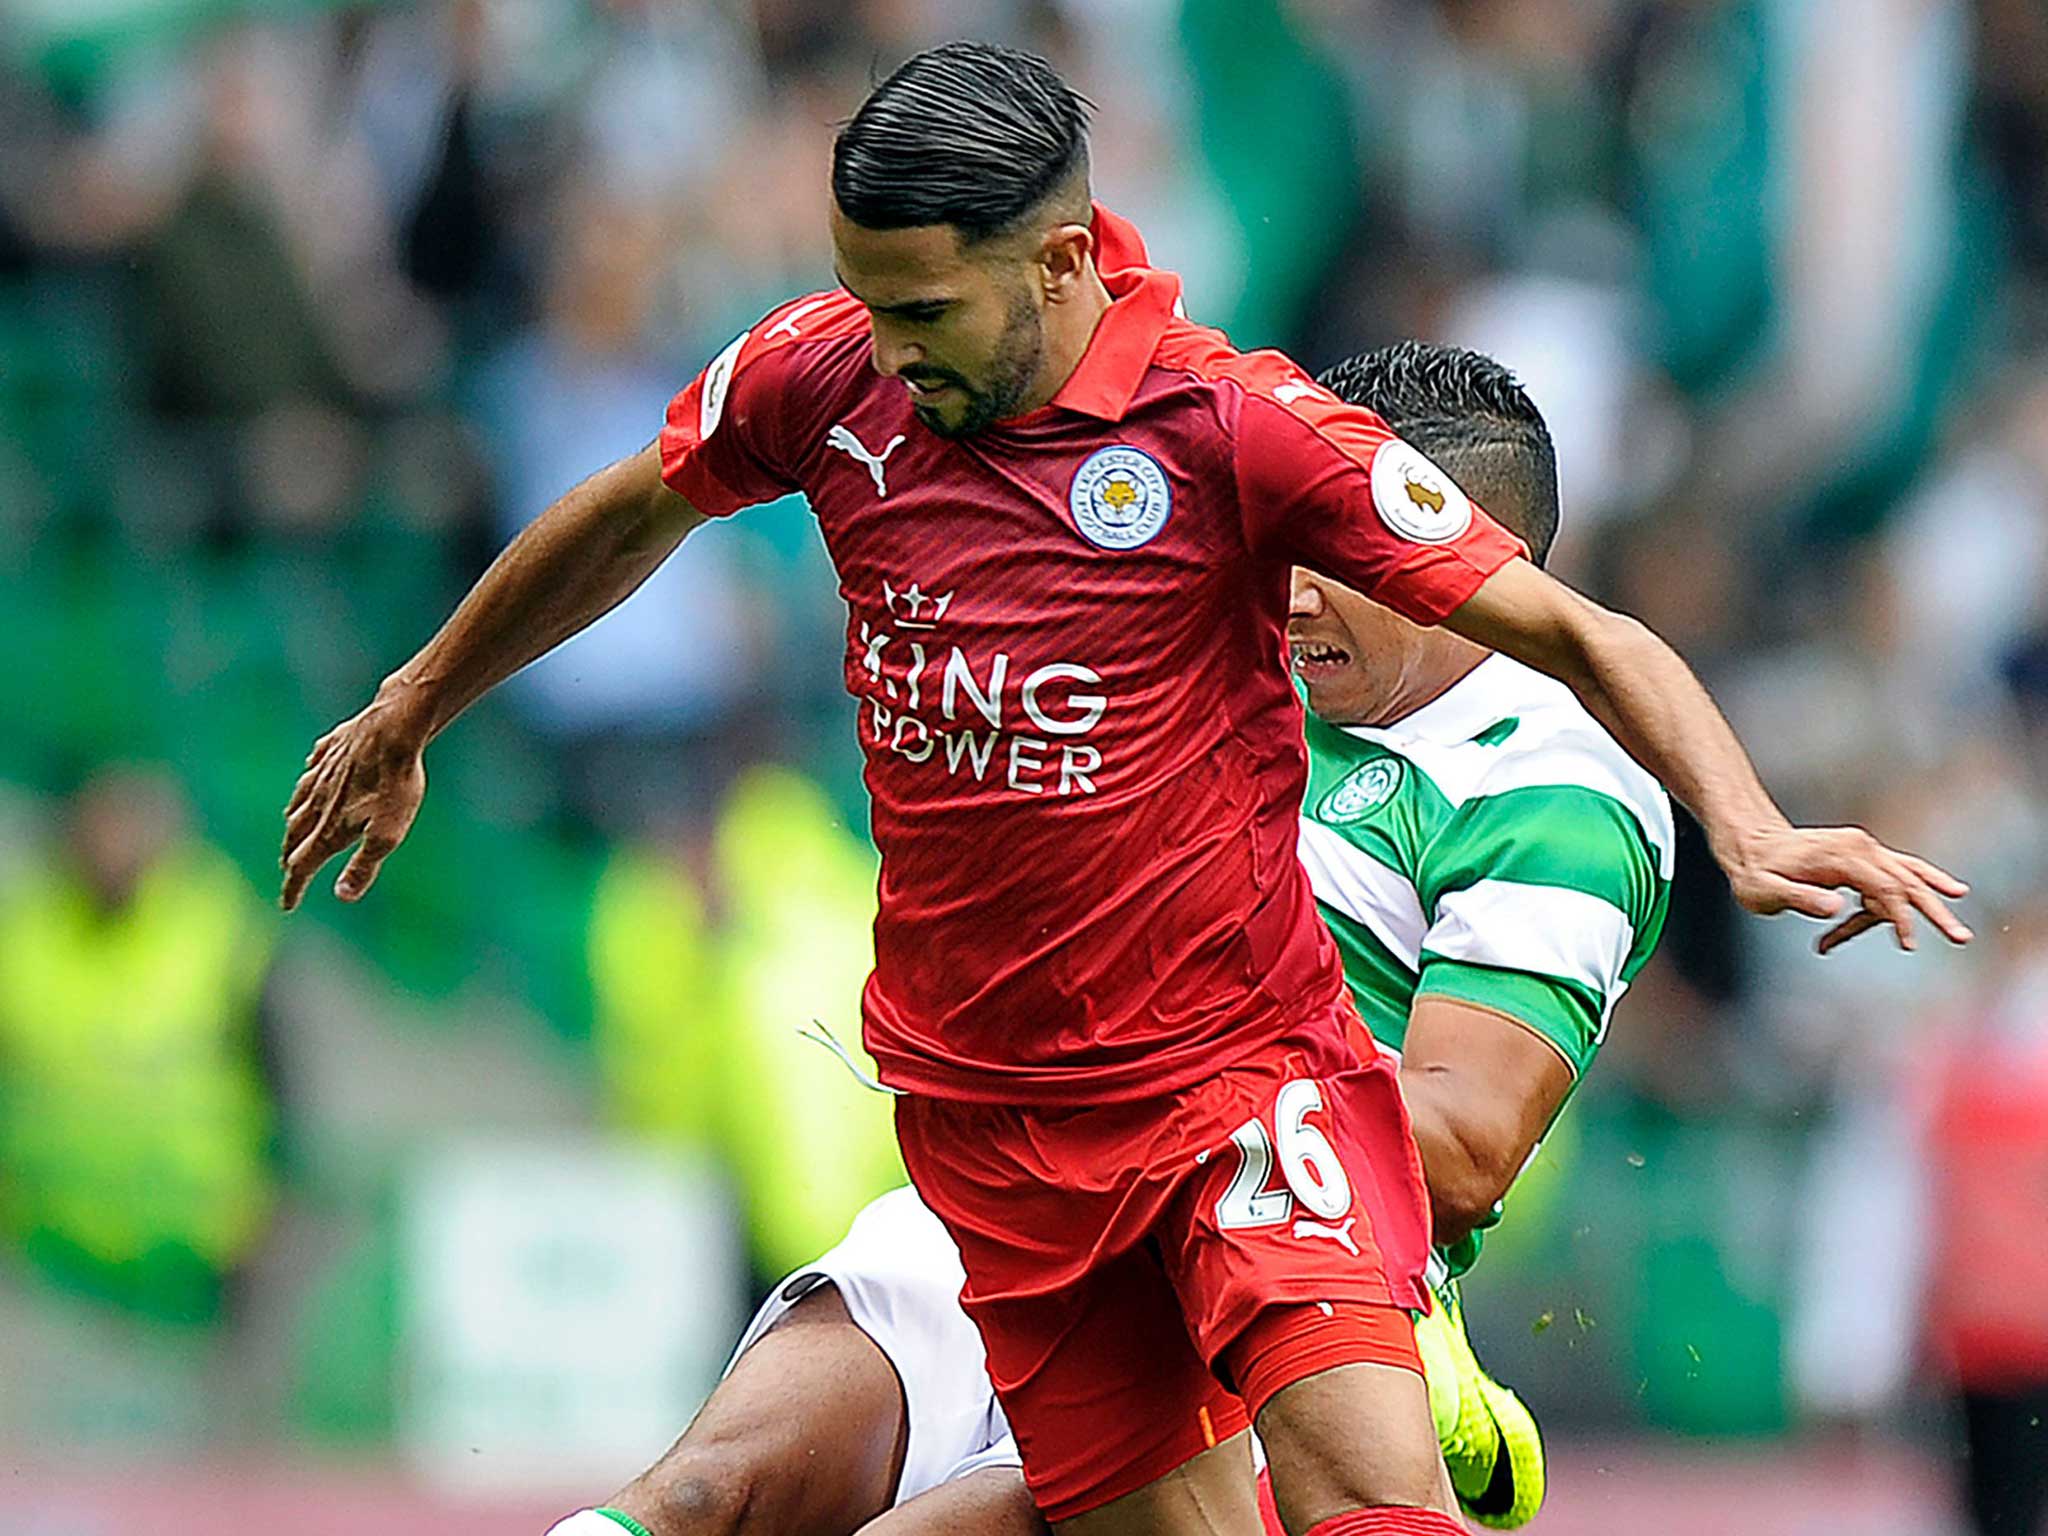 Riyad Mahrez was in fine form for Leicester City at Celtic